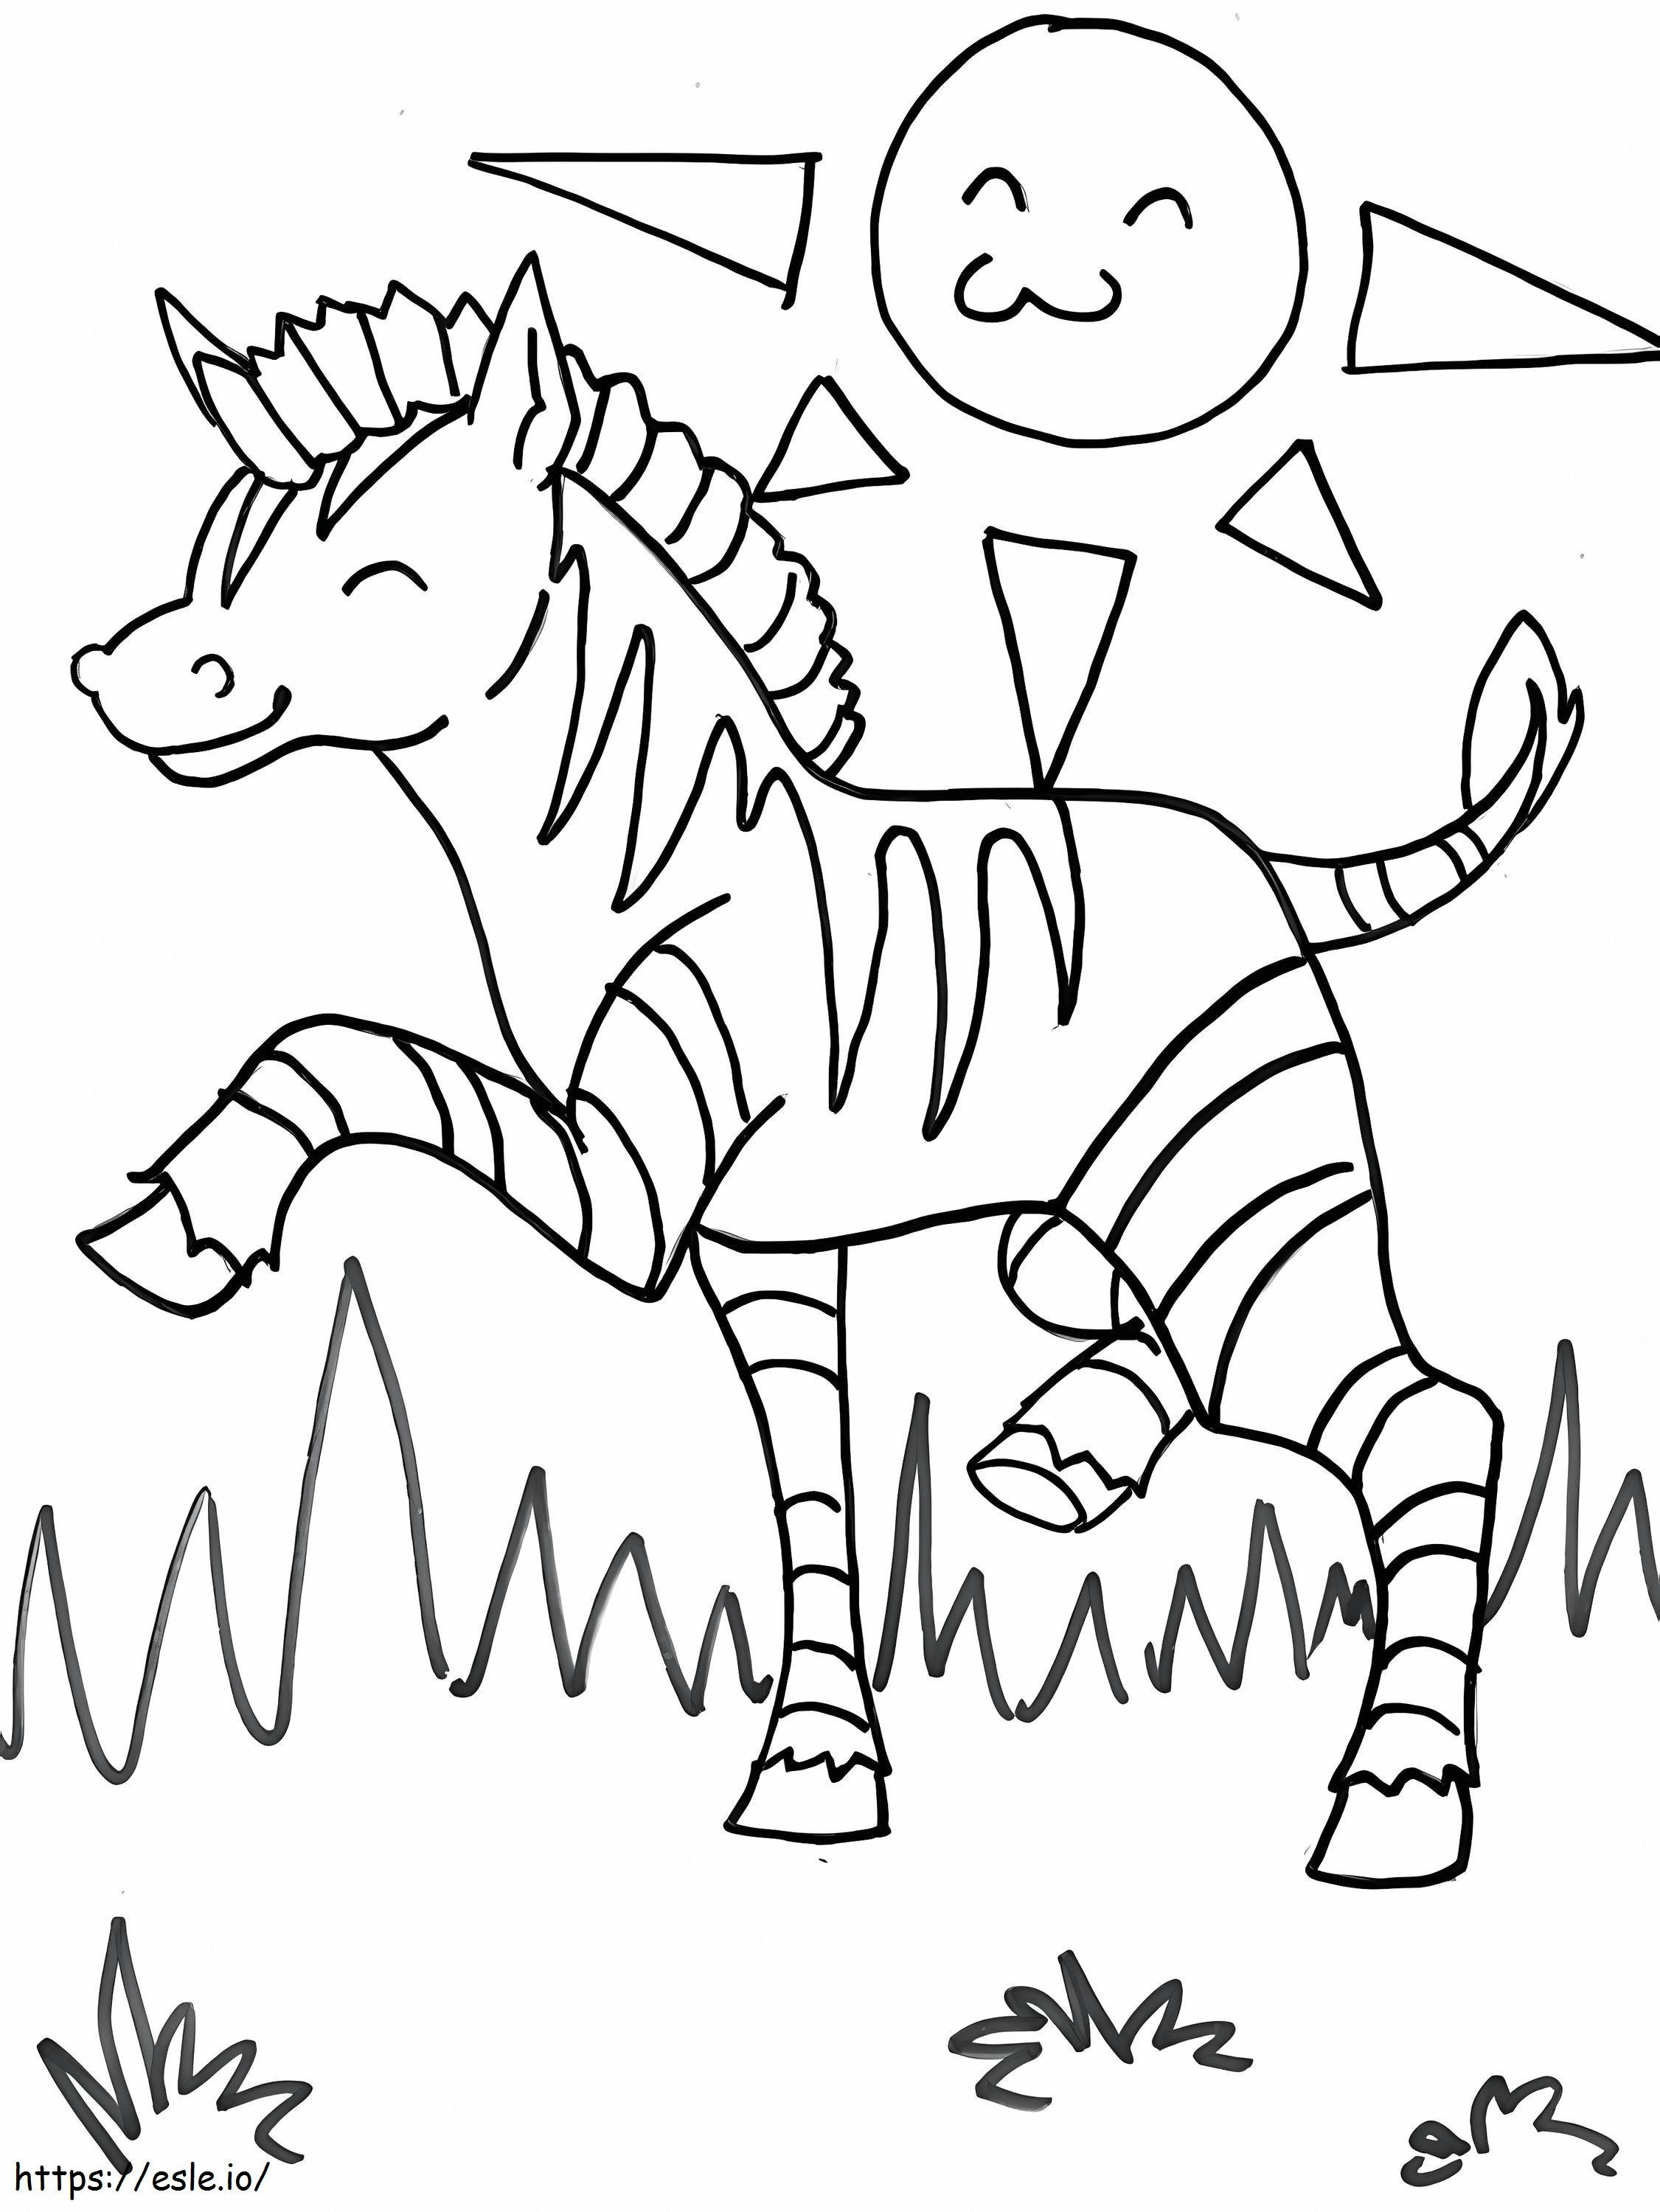 Zebra With Sun coloring page